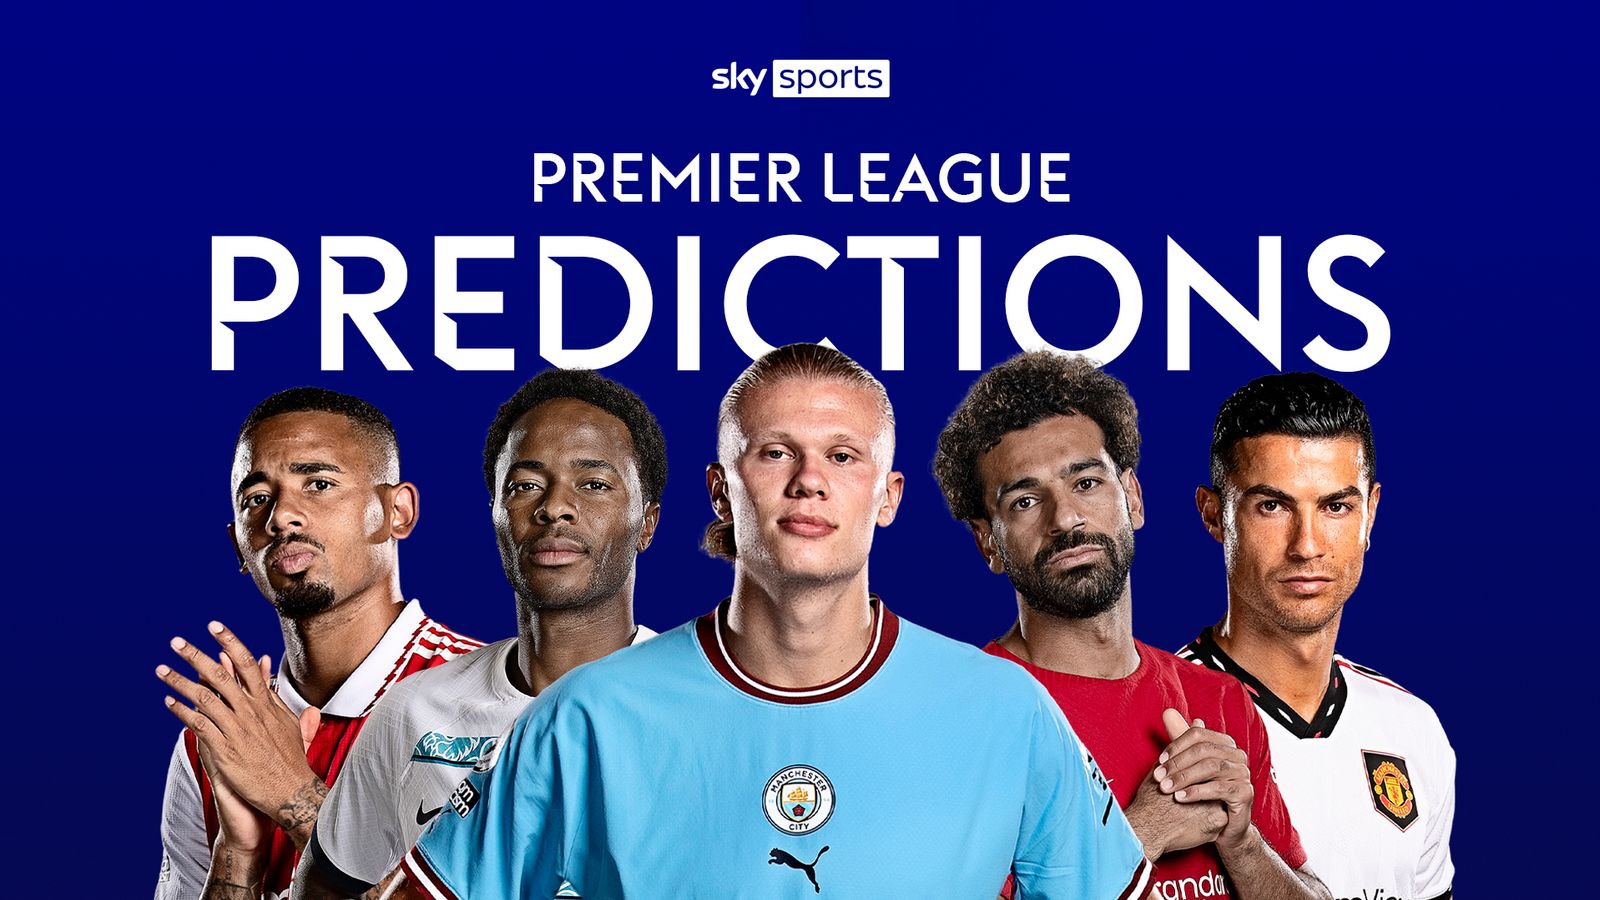 premier-league-predictions-jones-knows-thinks-tired-tottenham-will-falter-at-bournemouth-chelsea-will-hit-rocky-ground-at-brighton